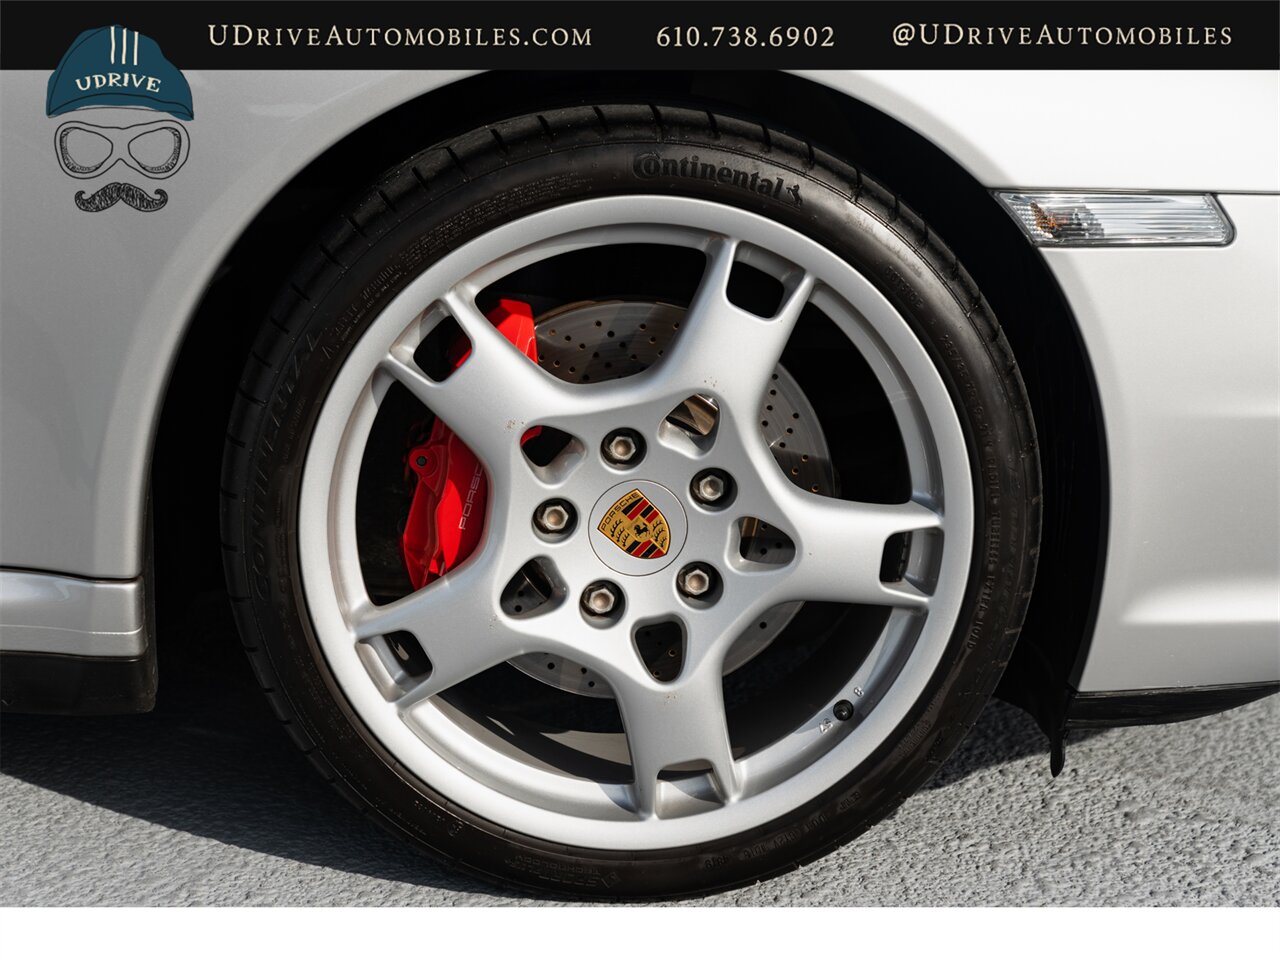 2006 Porsche 911 Carrera 4S  997 C4S 6 Speed Manual Service History - Photo 59 - West Chester, PA 19382